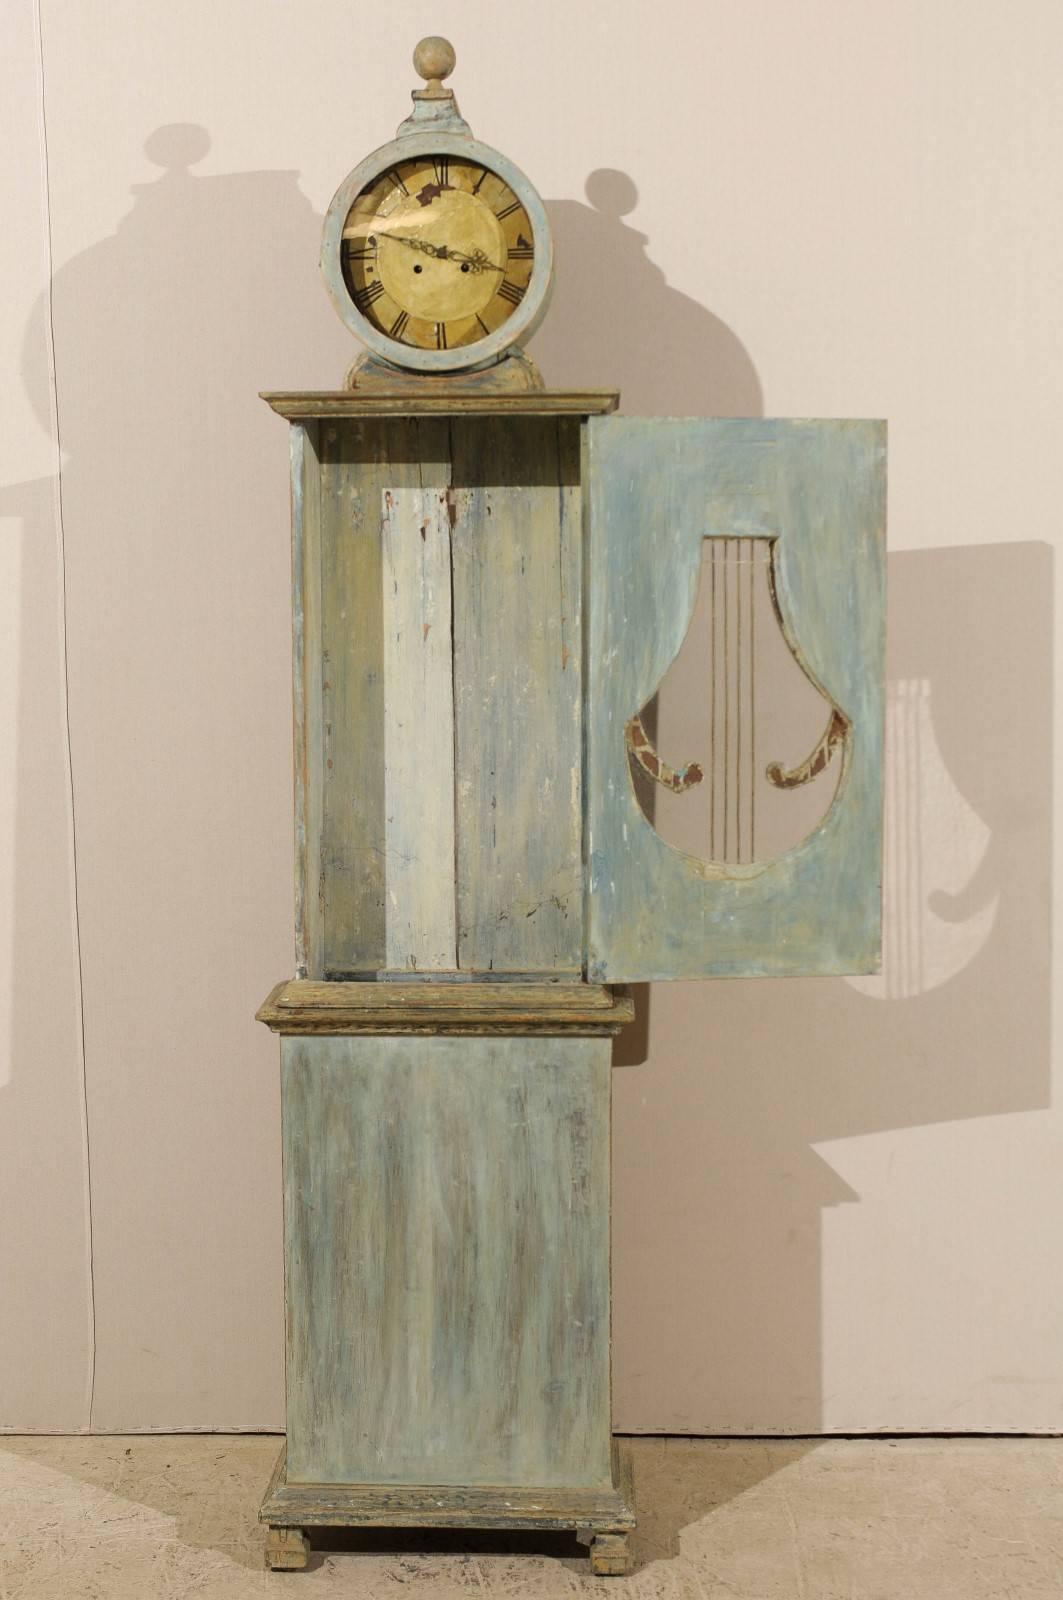 Painted Swedish Clock with Lyre Shaped Motif, Nicely Aged Face and Round Finial